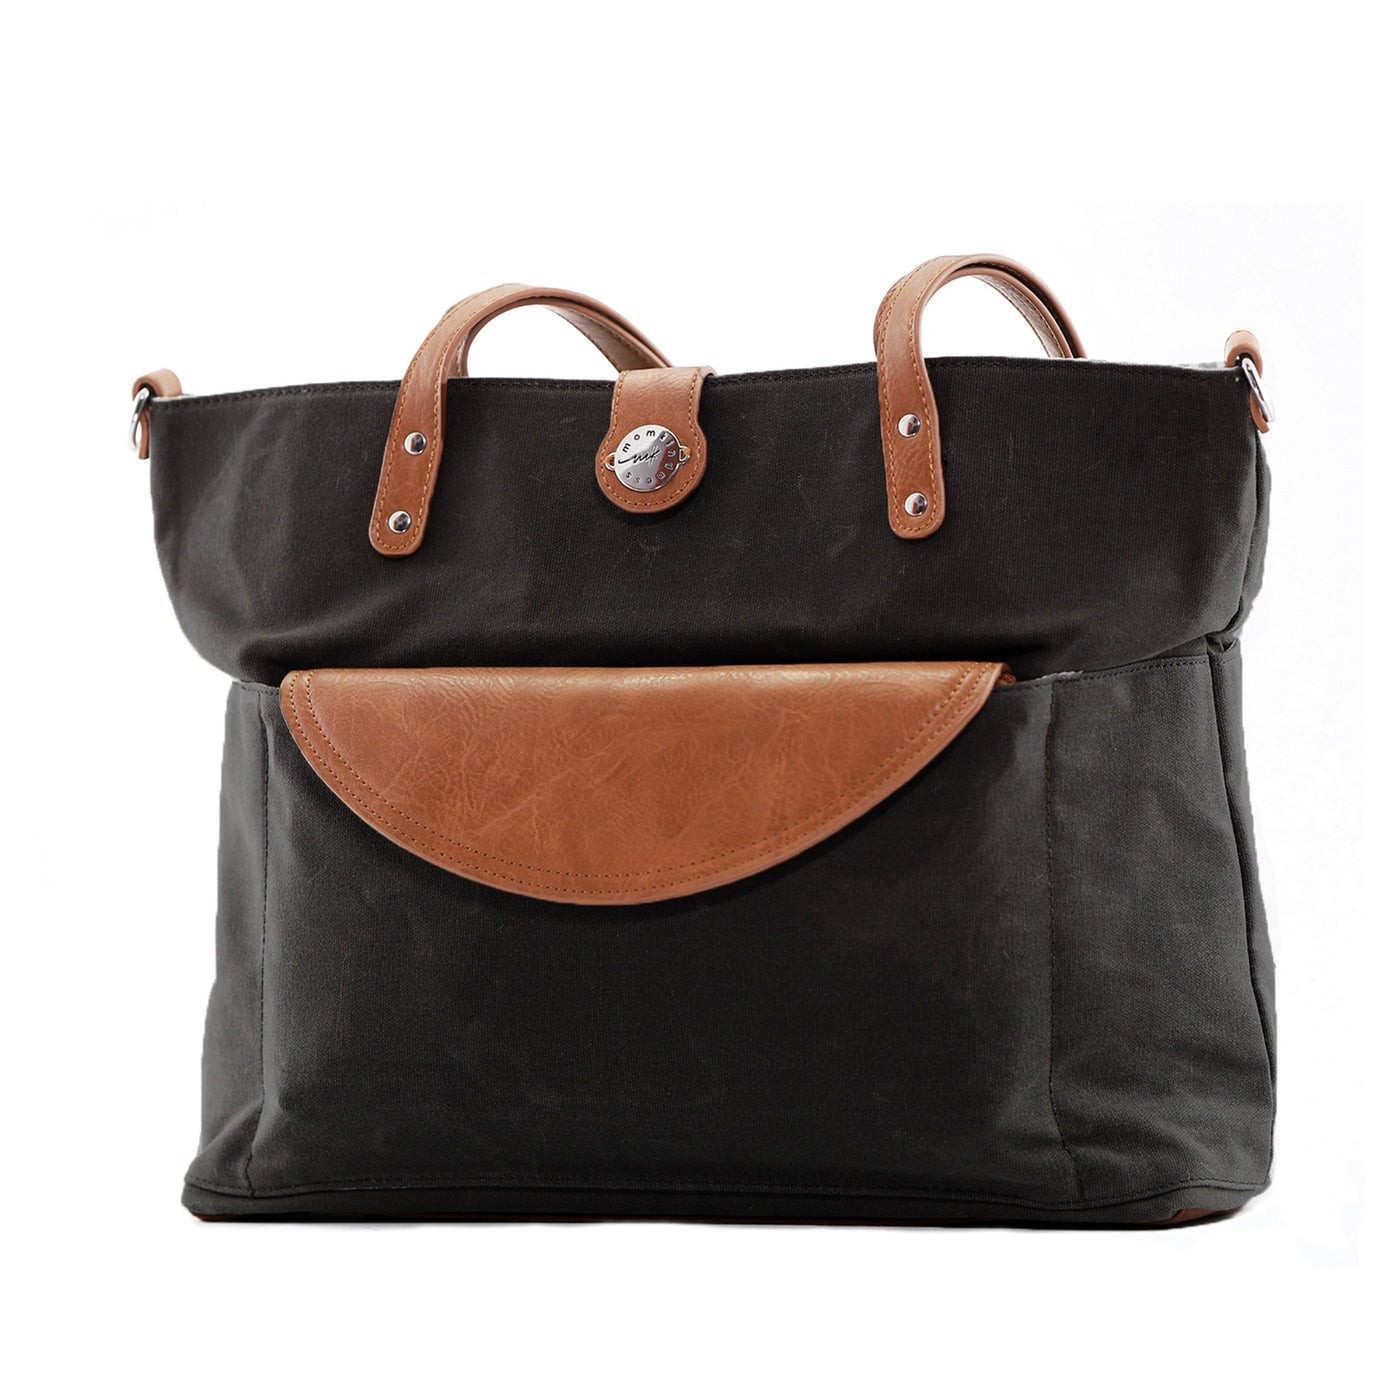 Black waxed canvas tote bag with brown vegan leather accents and brown clutch in front pocket, all on a white background. 